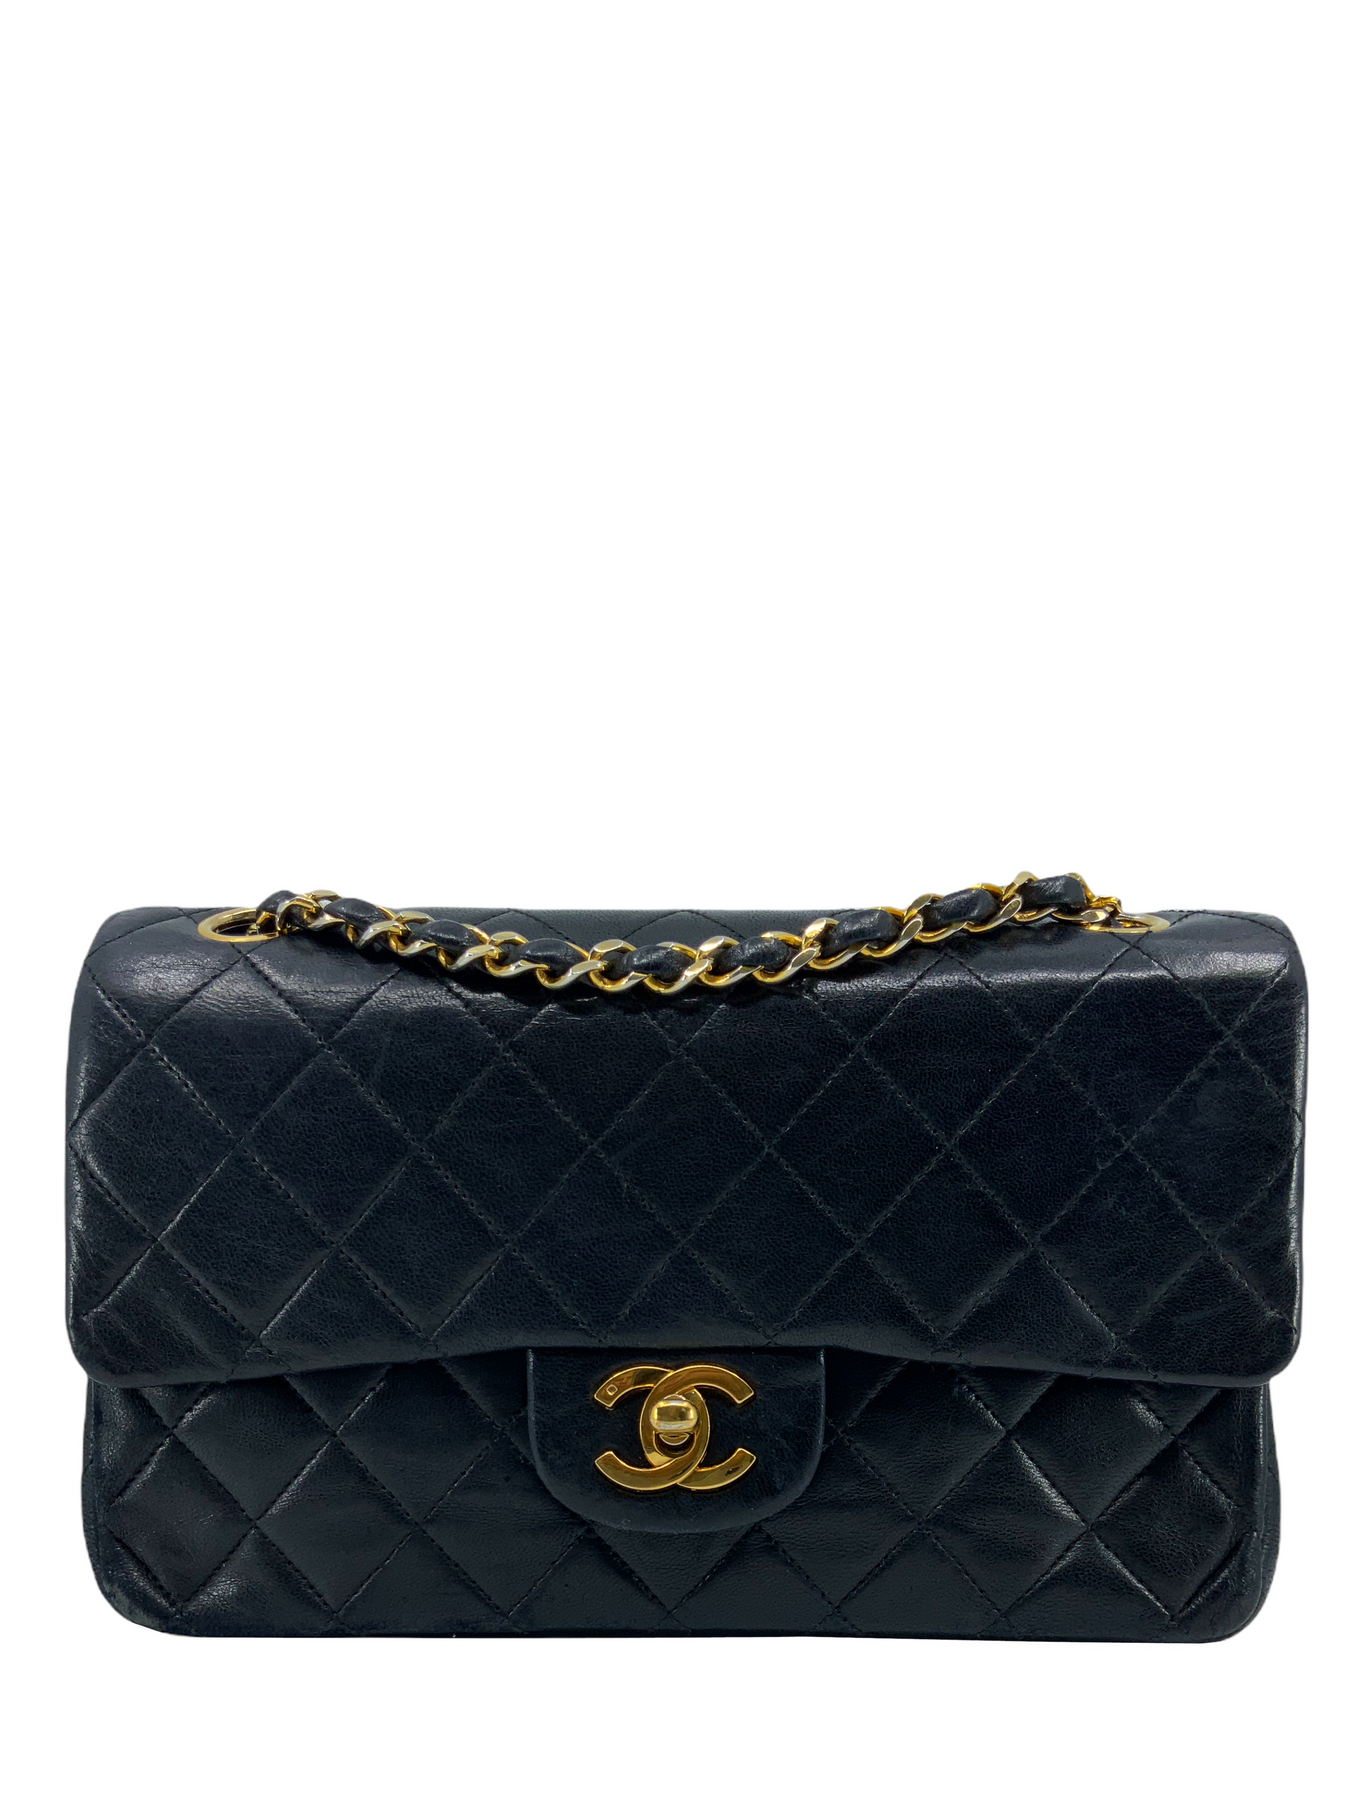 Chanel Vintage Quilted Lambskin Small Classic Double Flap Bag - Consigned  Designs